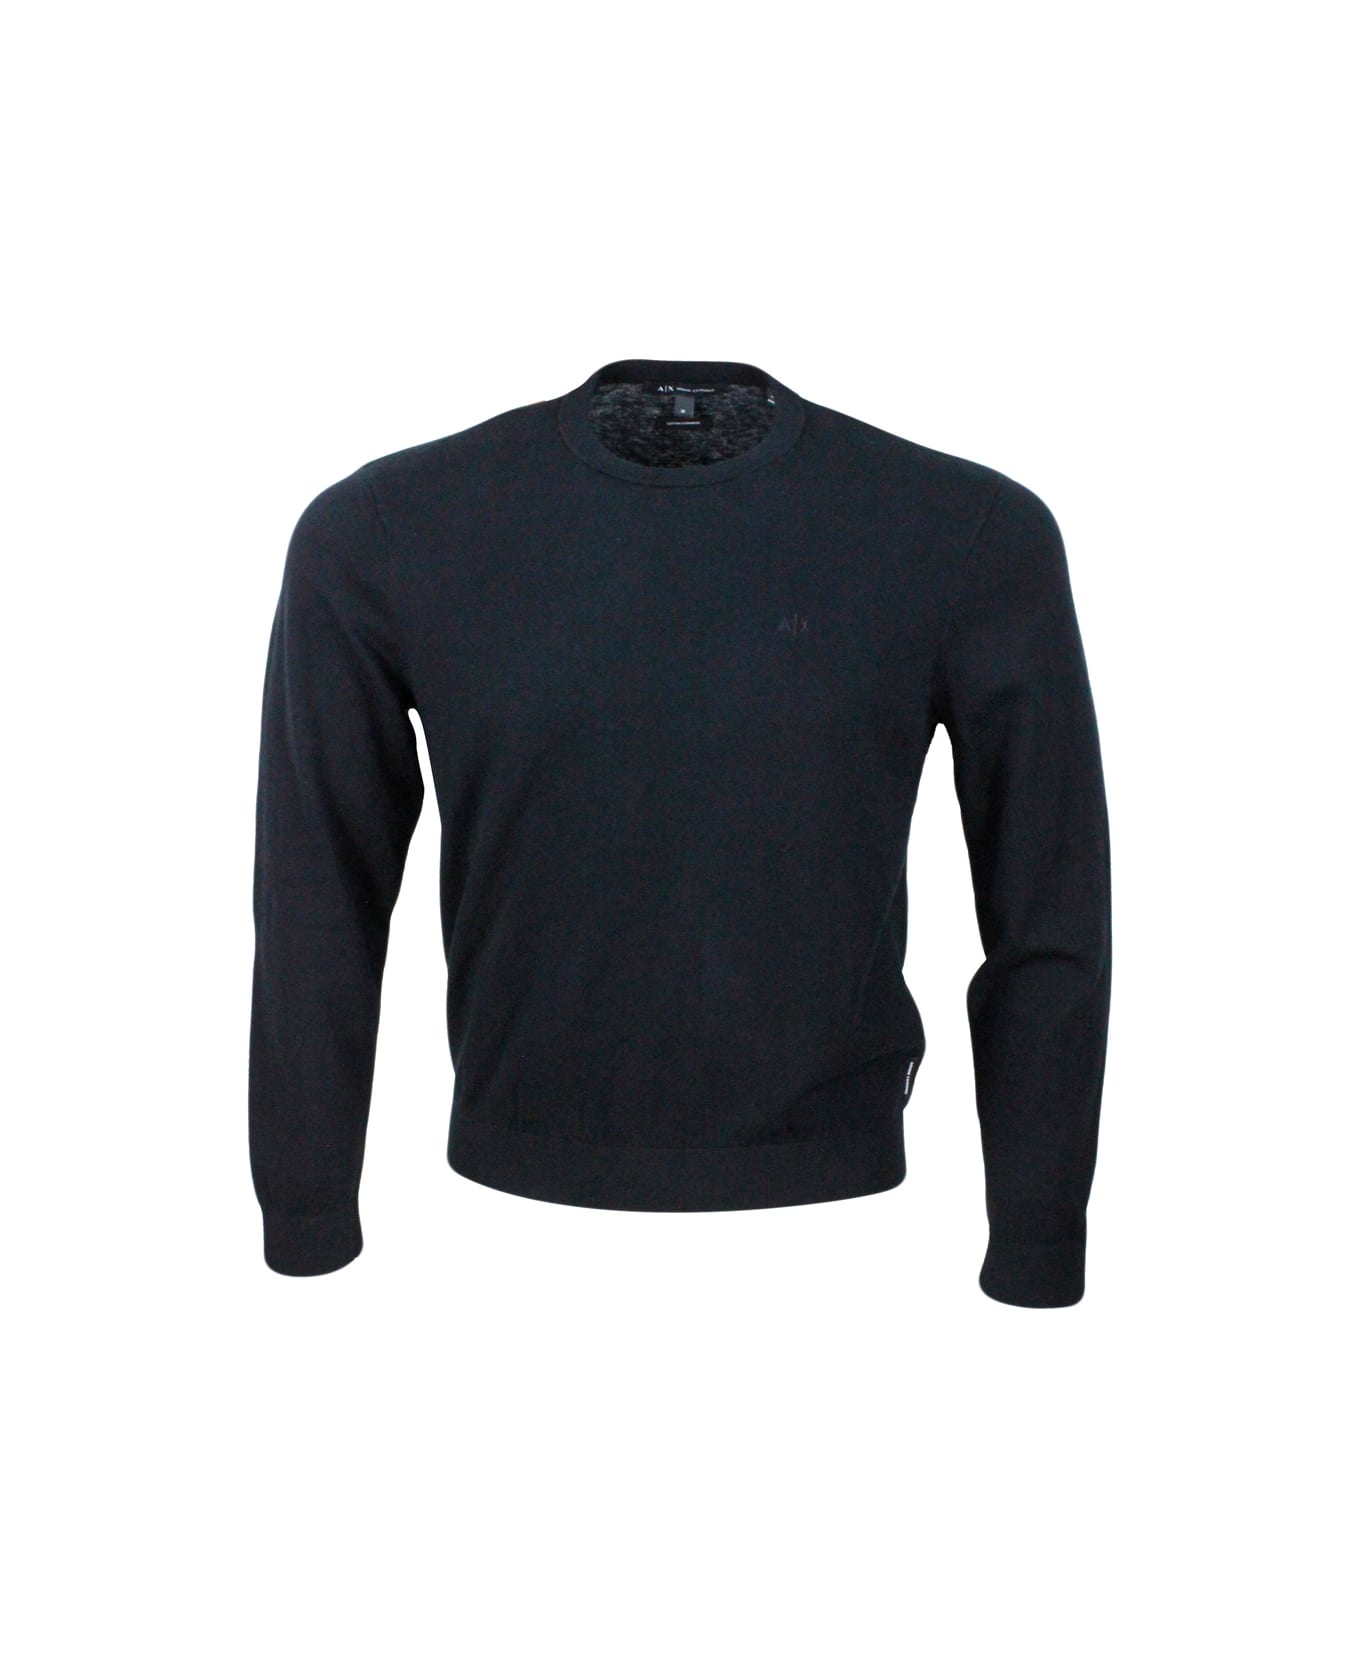 Armani Collezioni Lightweight Long-sleeved Crew-neck Sweater Made Of Warm Cotton And Cashmere With Contrasting Color Profiles At The Bottom And On The Cuffs - Black ニットウェア